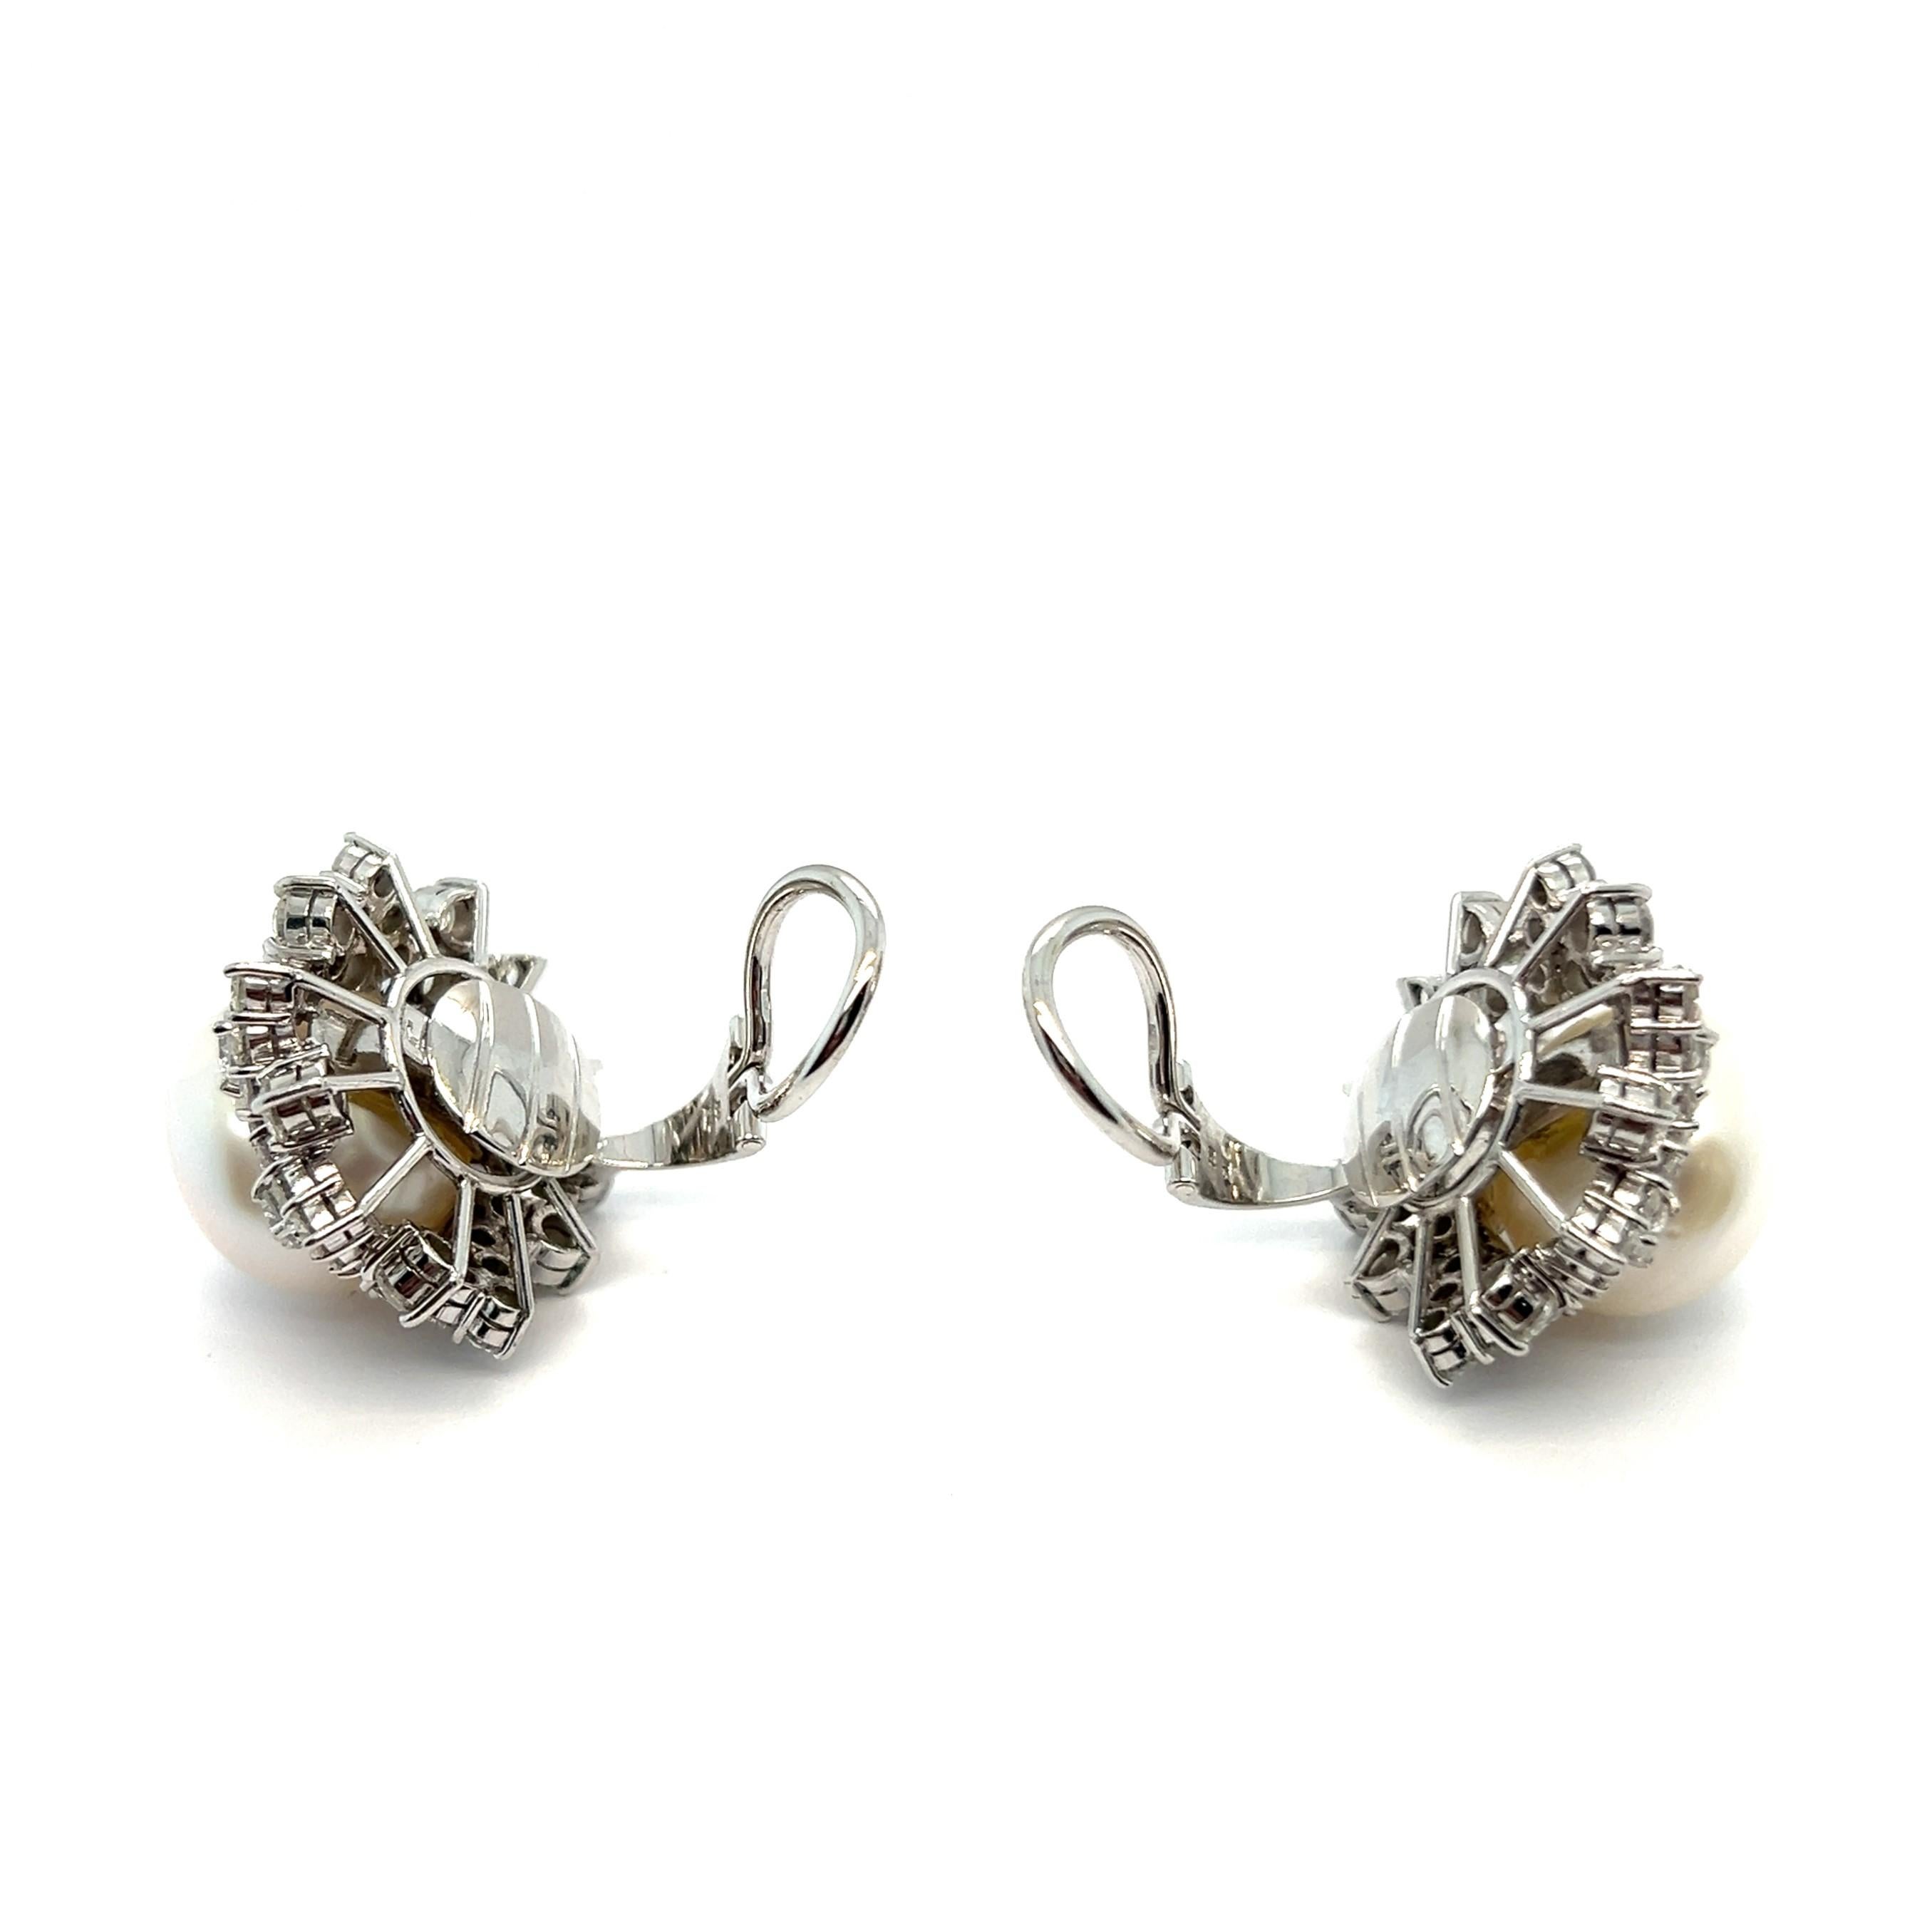 South Sea Pearl Earrings in 18 Karat White Gold by Meister For Sale 2